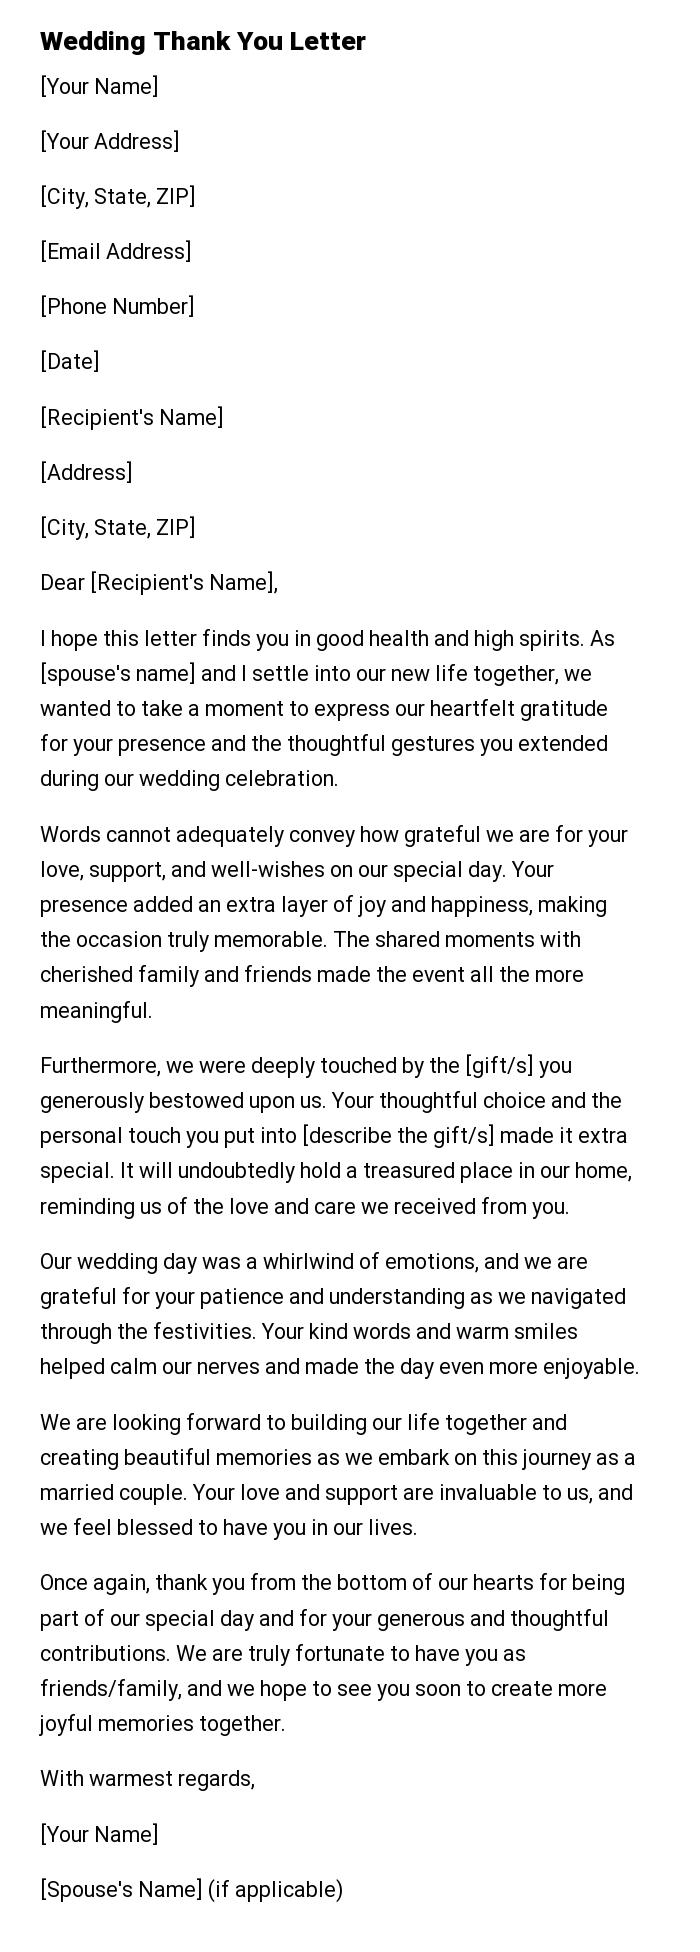 Wedding Thank You Letter